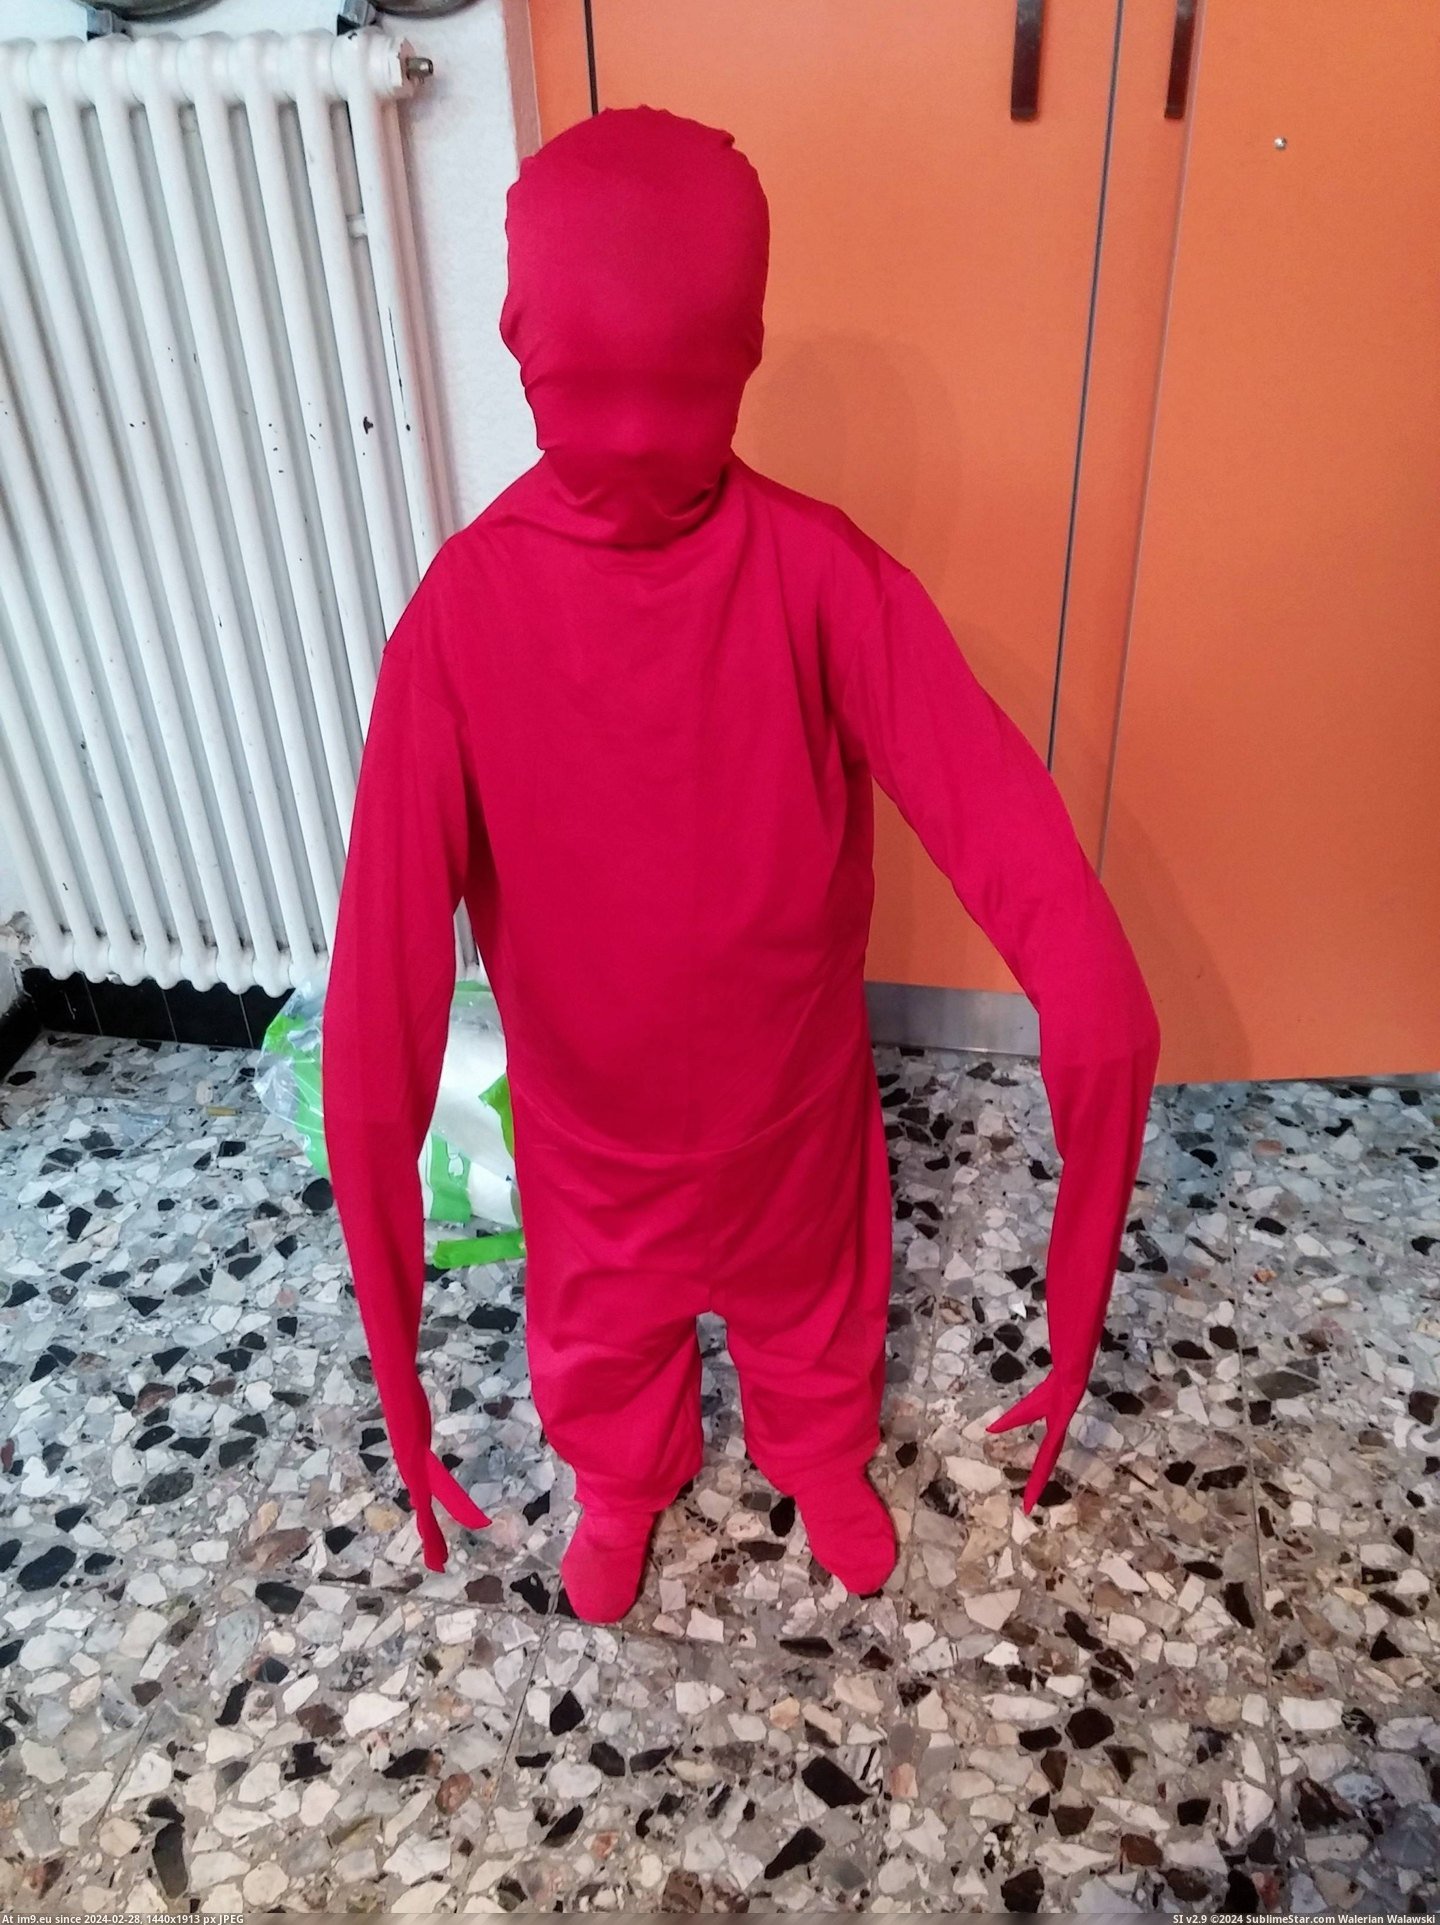 #Son #Terrifying #Morph #Suit [Pics] my son found my morph suit and it's terrifying Pic. (Obraz z album My r/PICS favs))